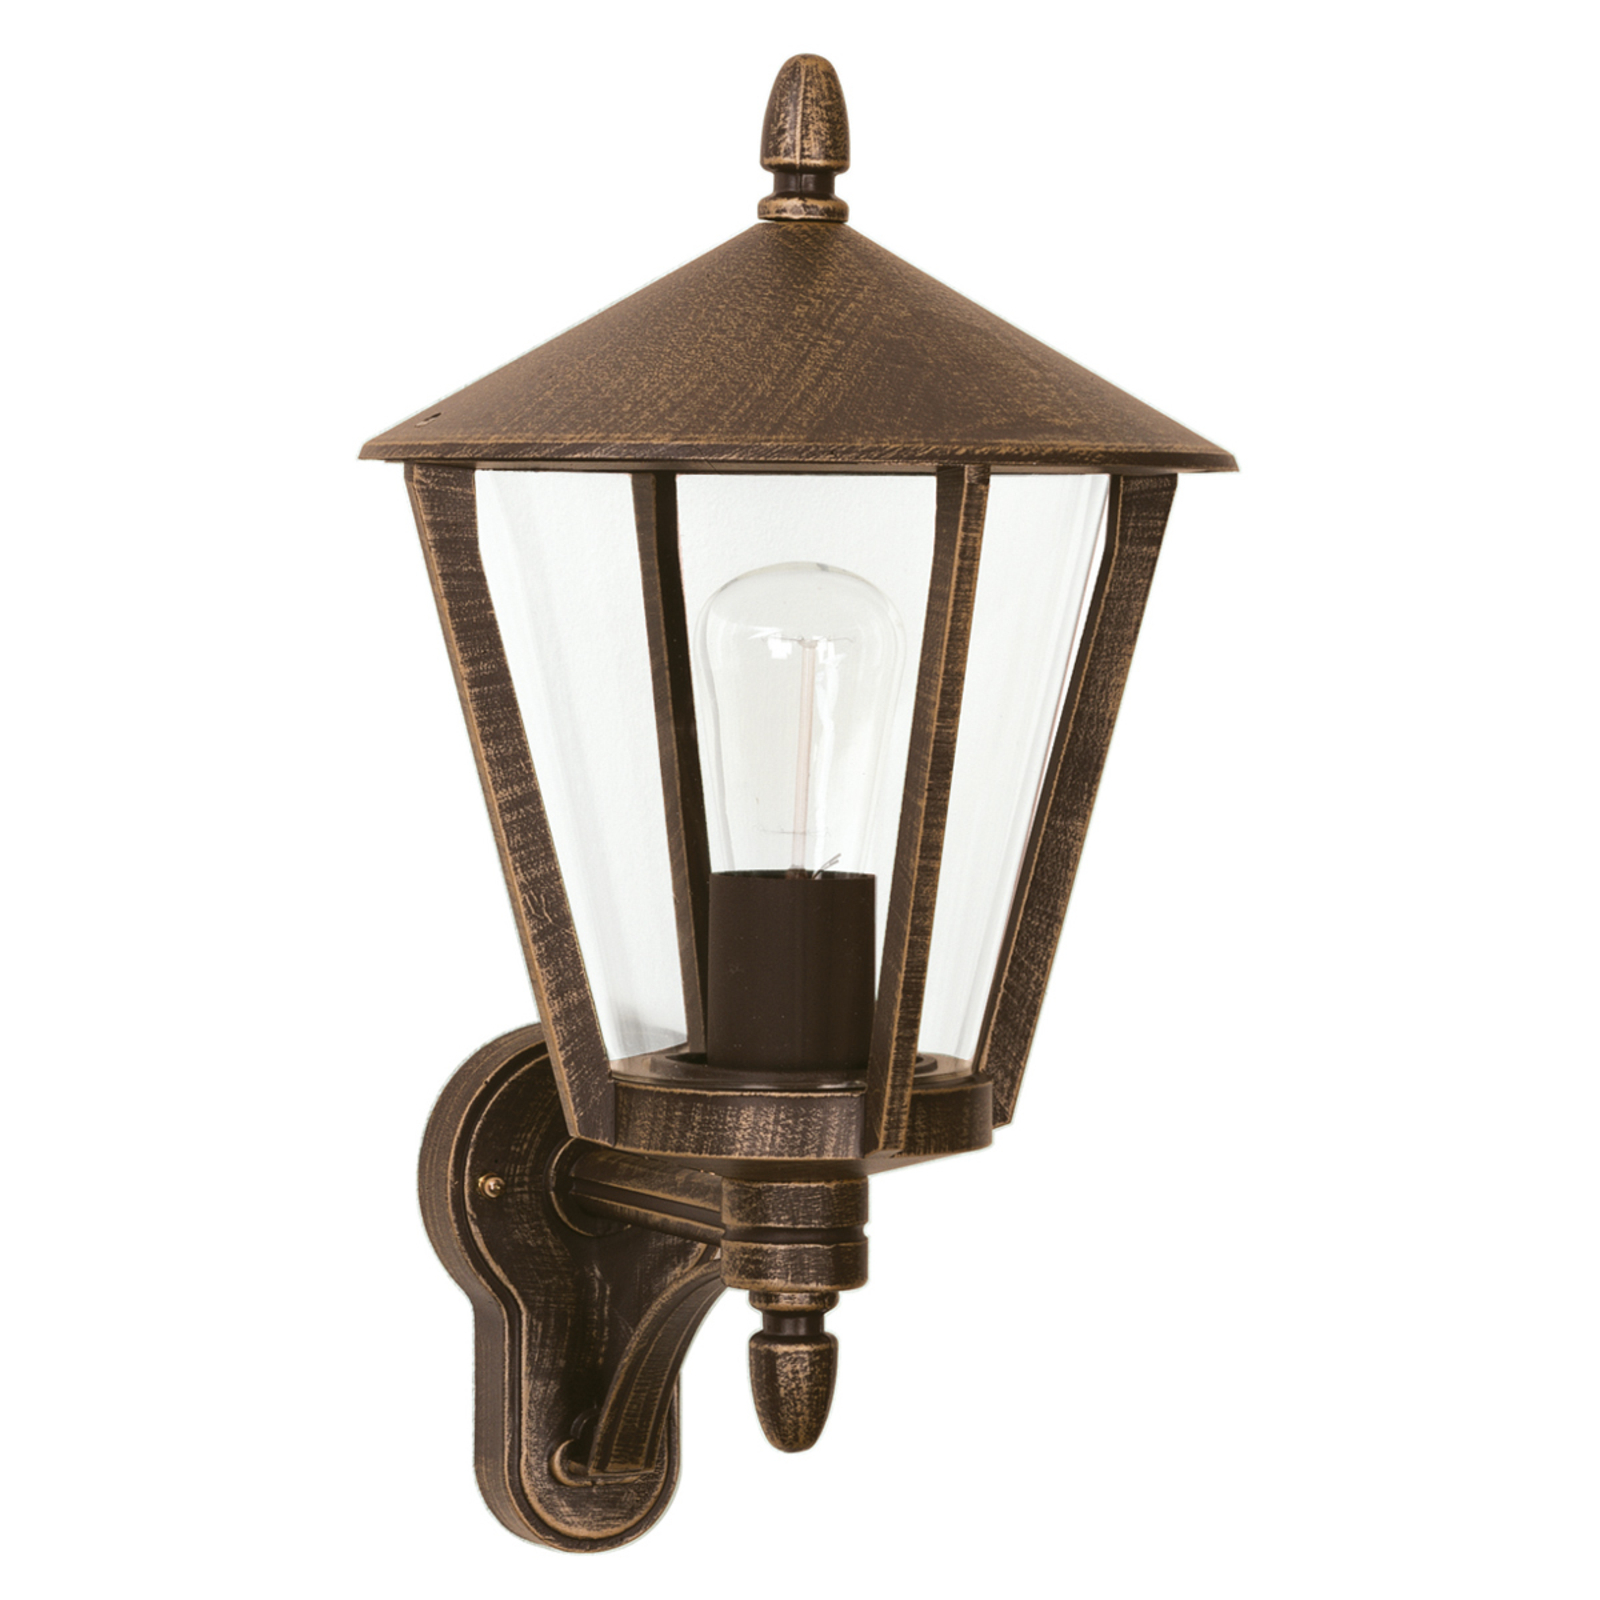 Stylish outdoor wall light 668, brown